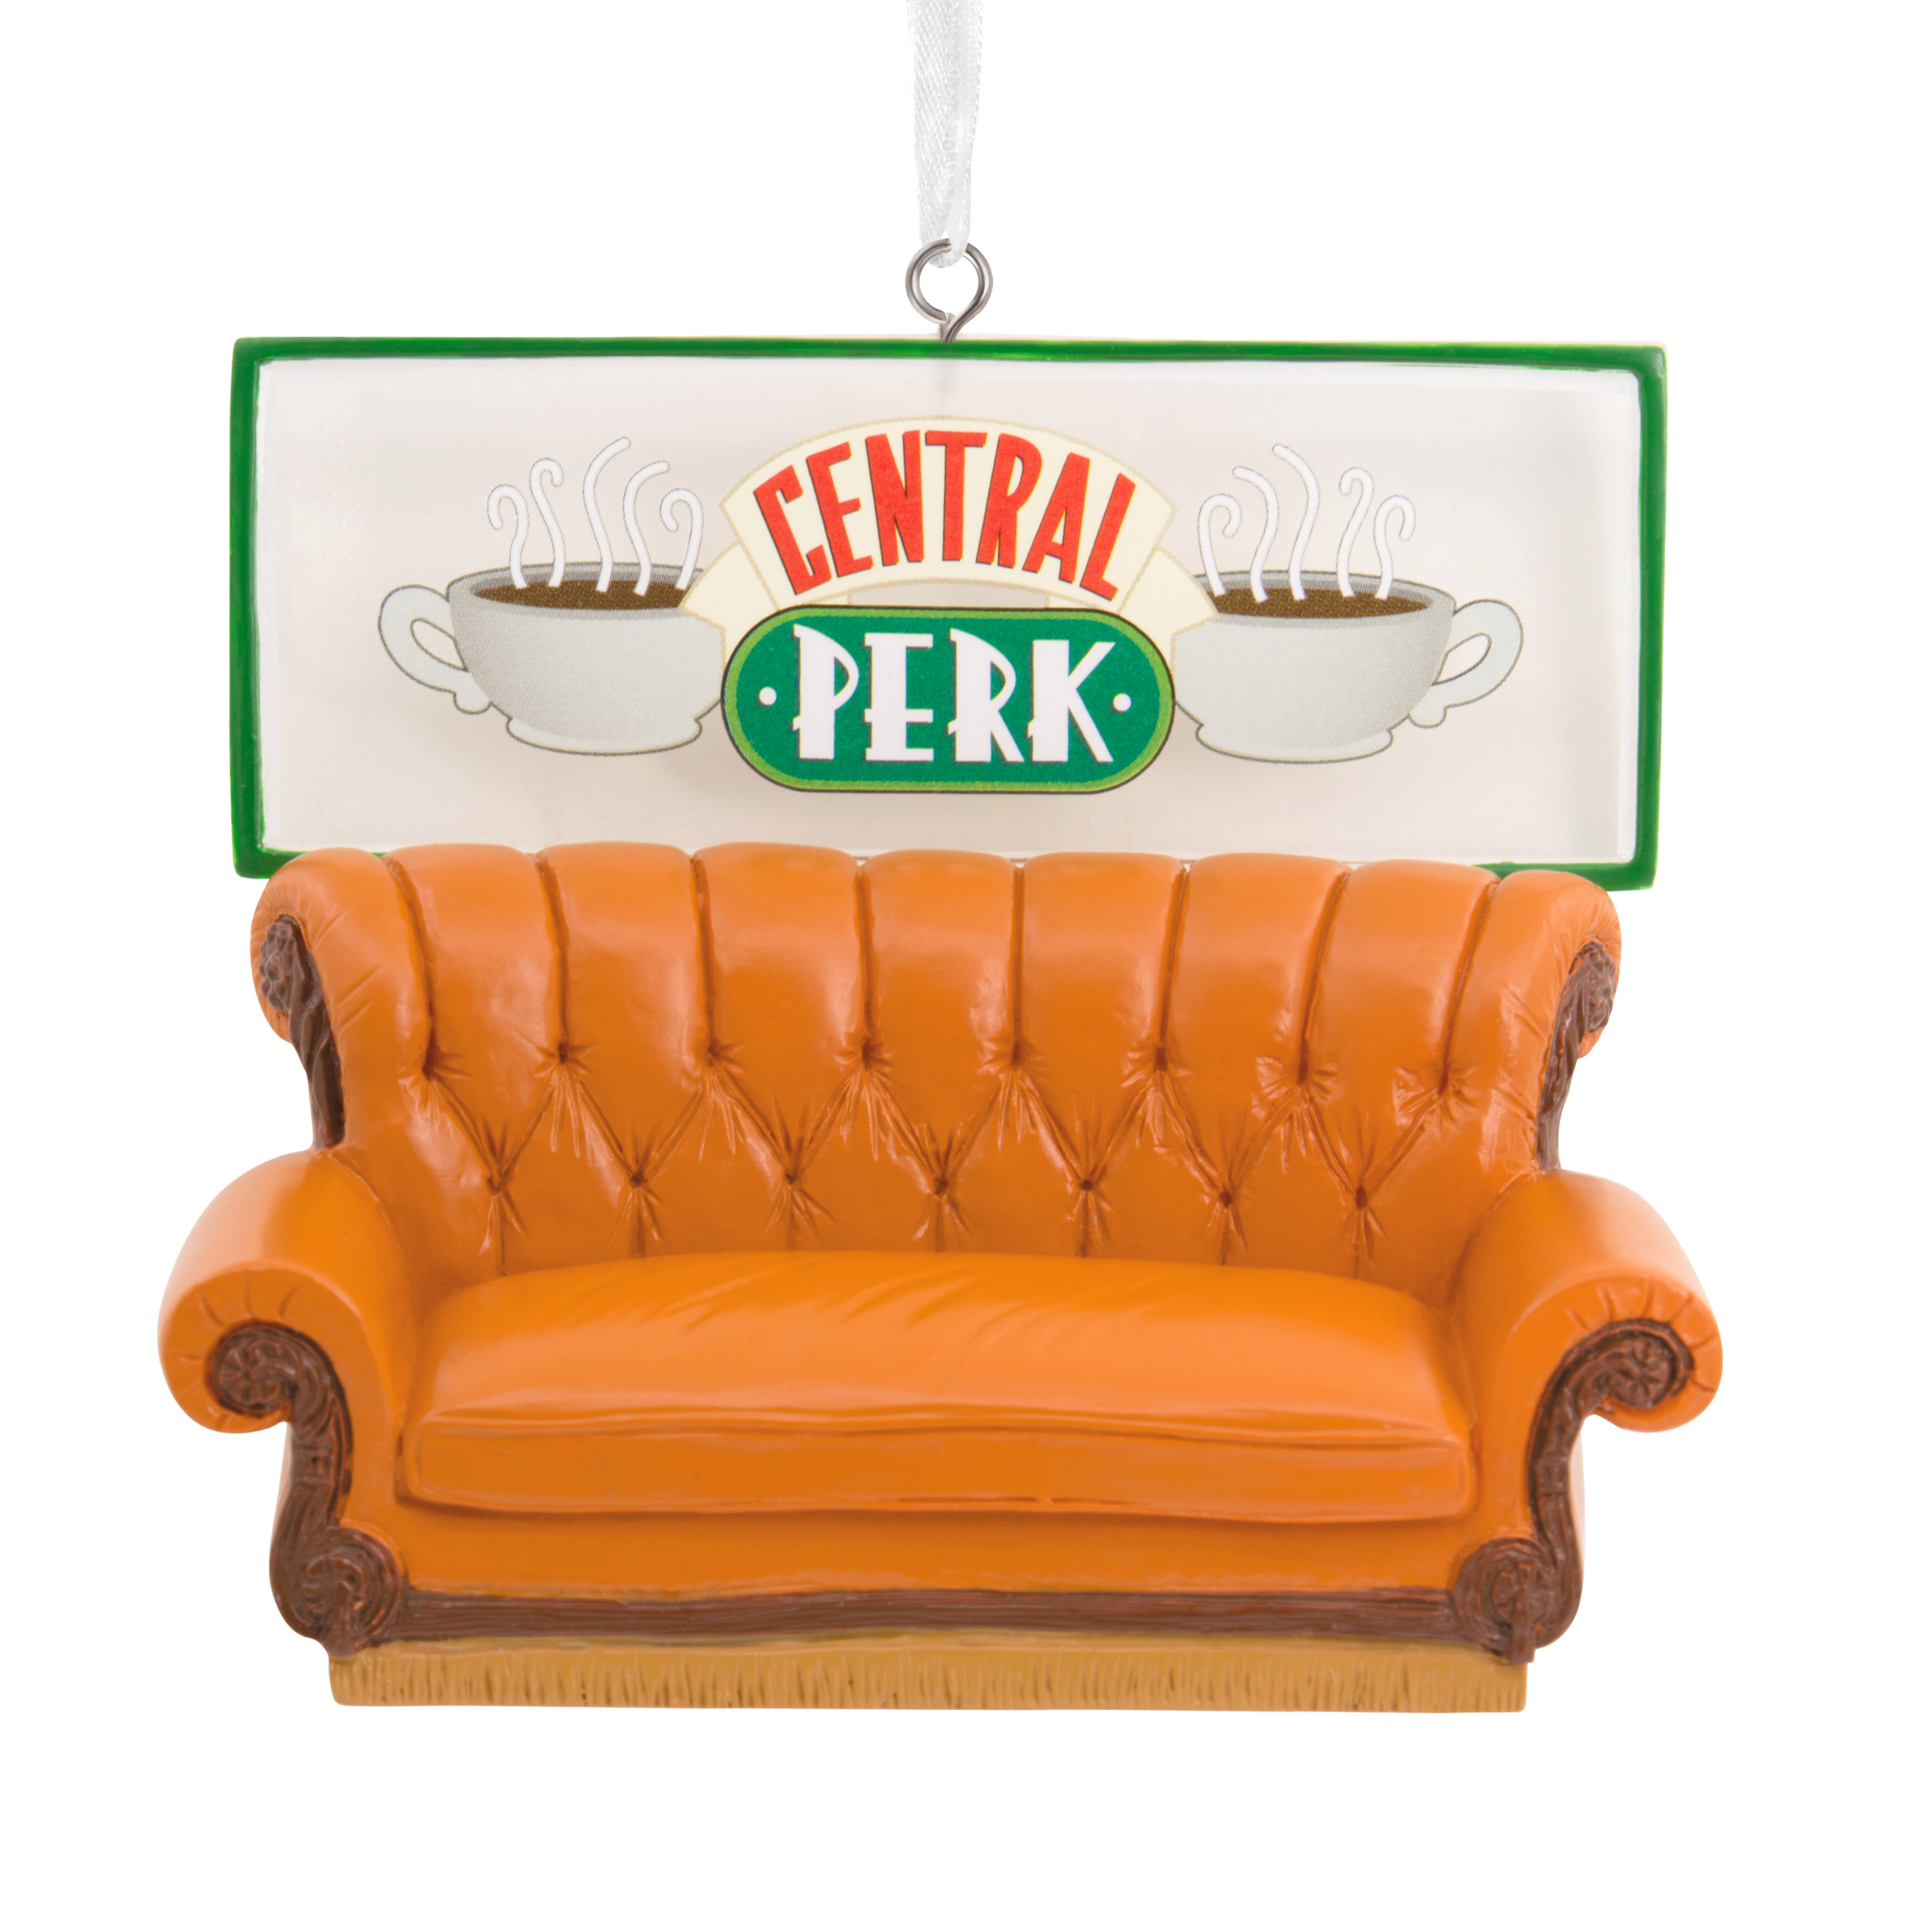 Friends Central Perk Couch 763795692699 nologo